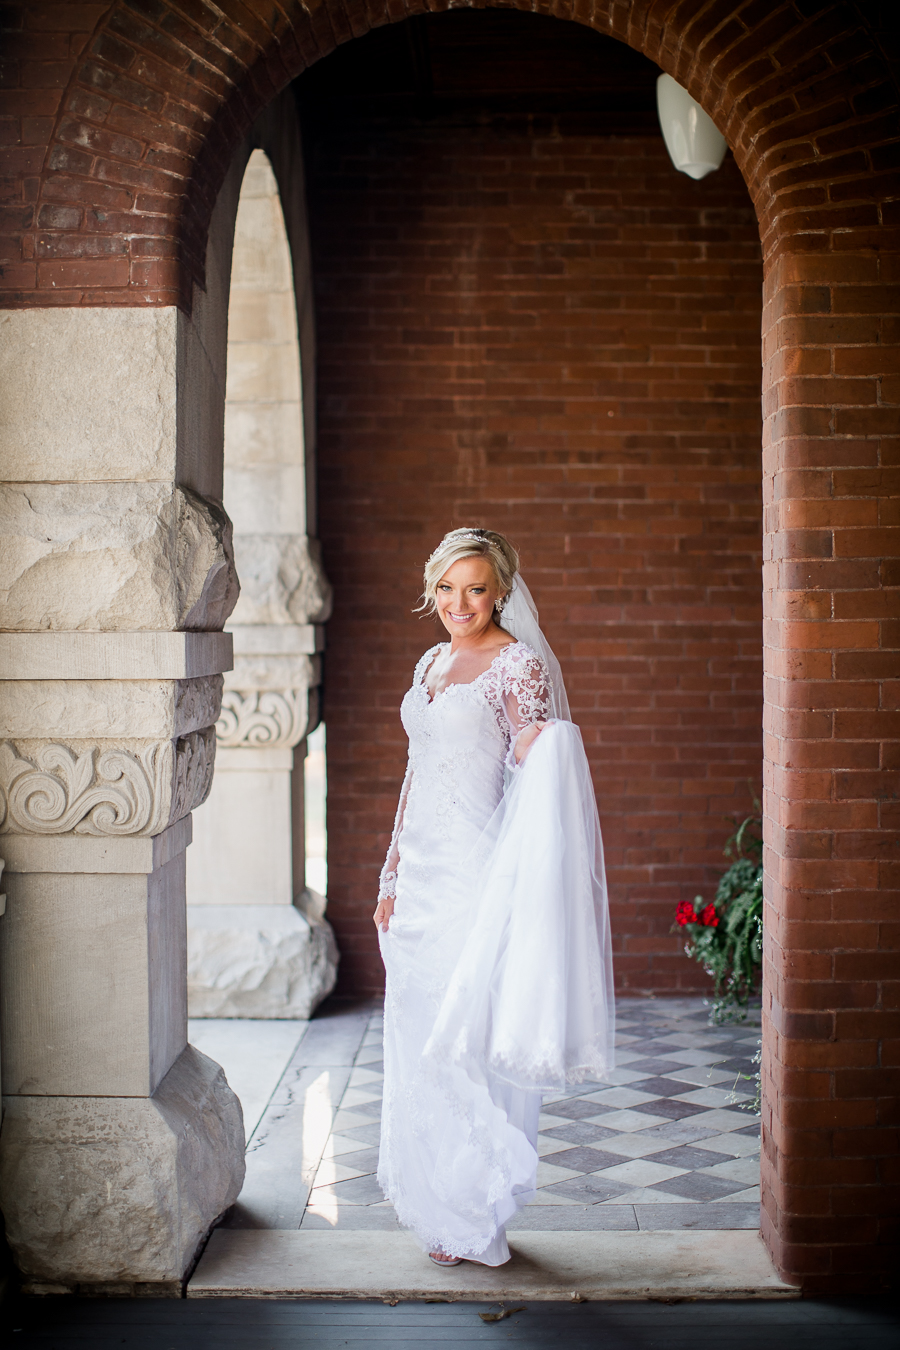 Holding her train at Historic Westwood by Knoxville Wedding Photographer, Amanda May Photos.